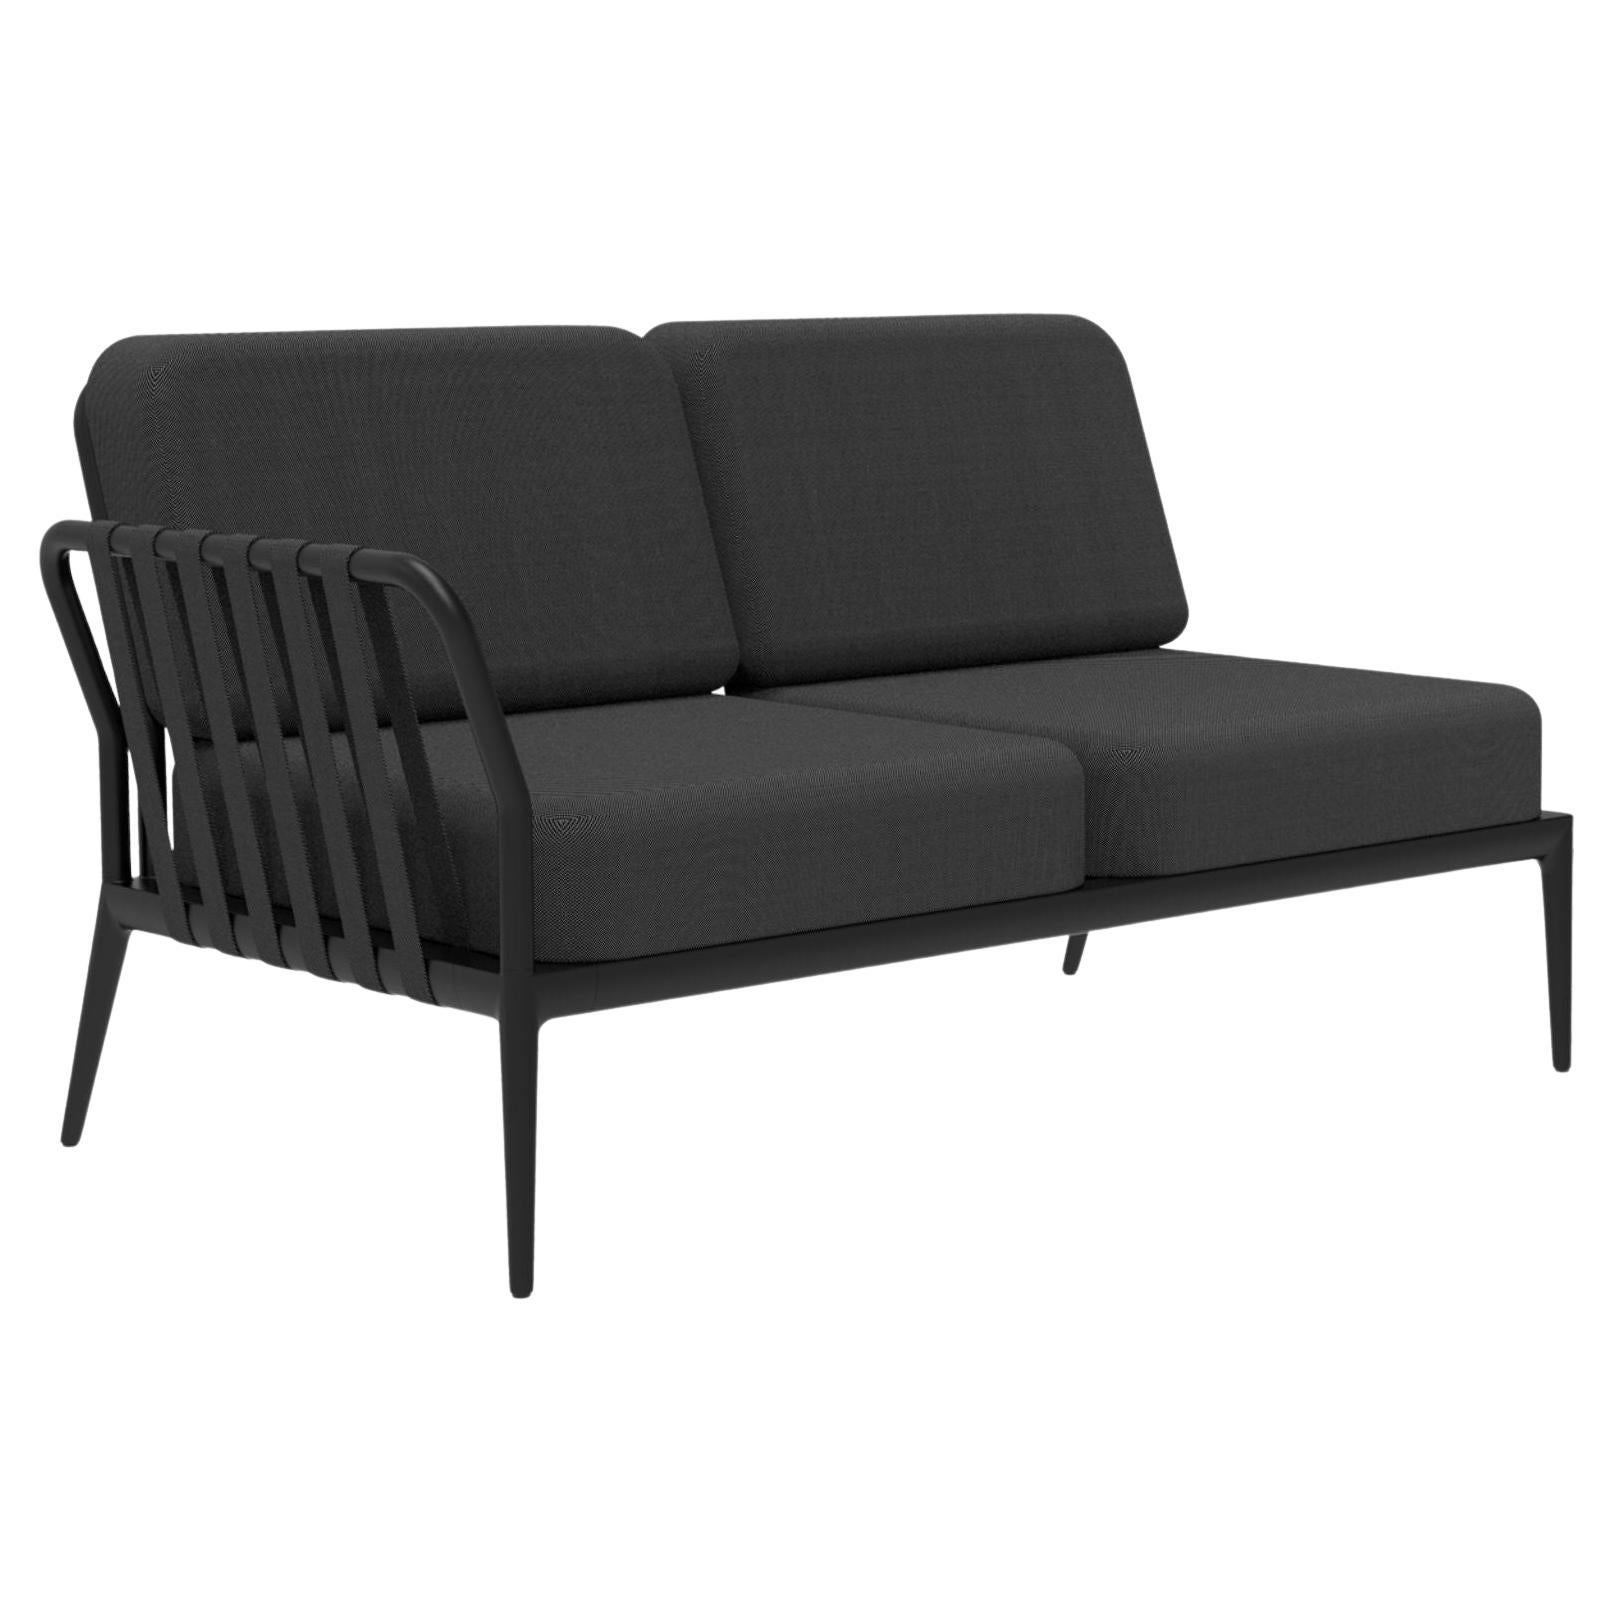 Ribbons Black Double Right Modular Sofa by Mowee